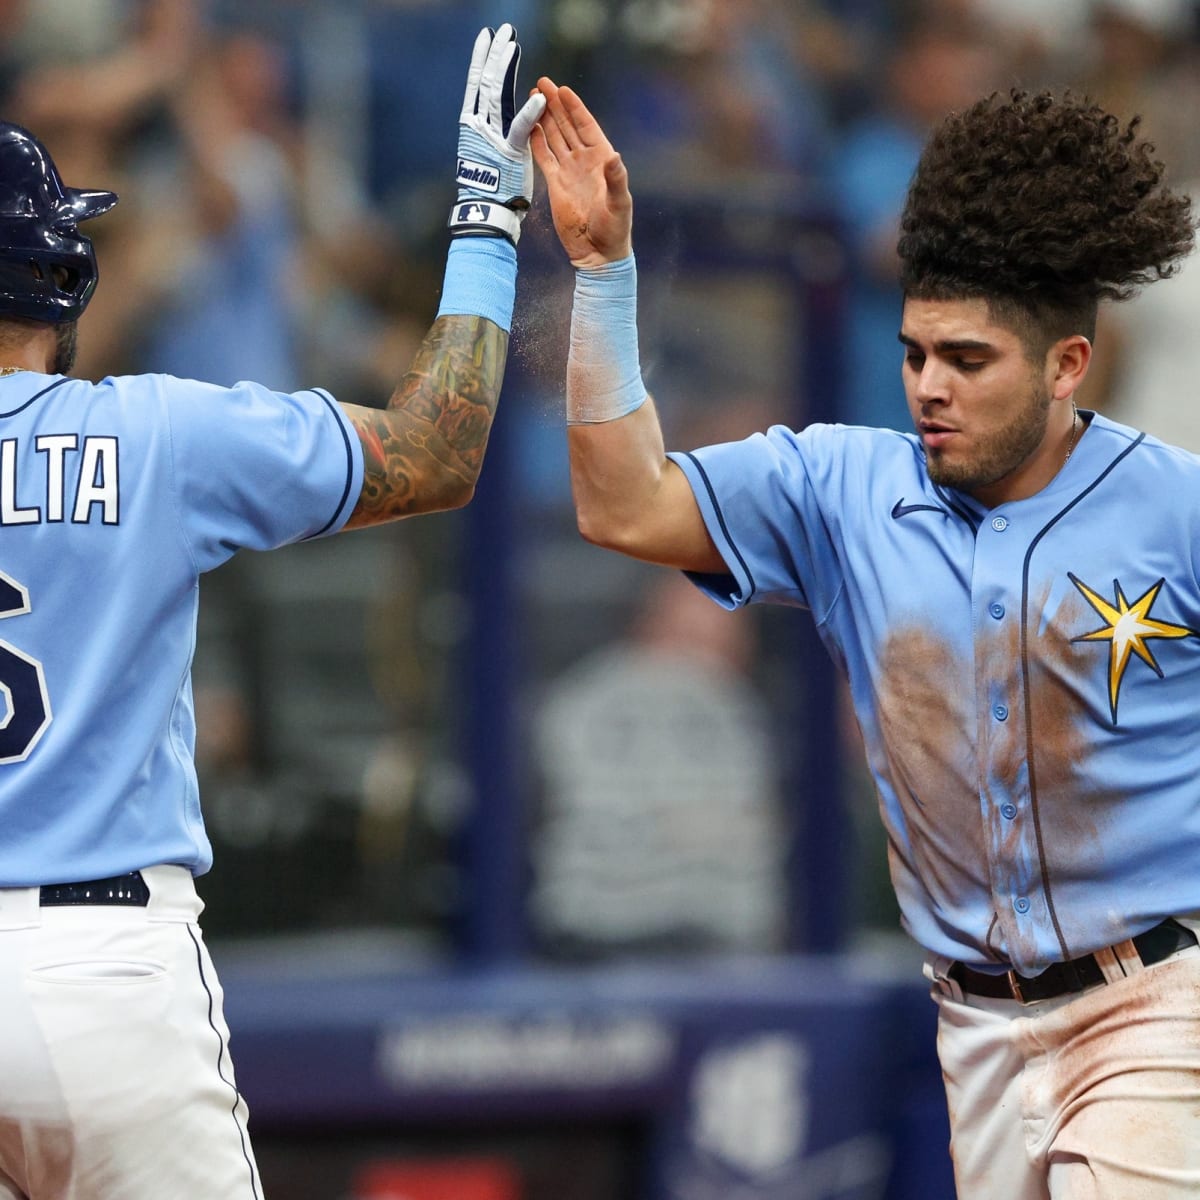 How Brett Phillips, the last man on the Rays' roster, started the most  bizarre World Series ending you will ever see - The Boston Globe